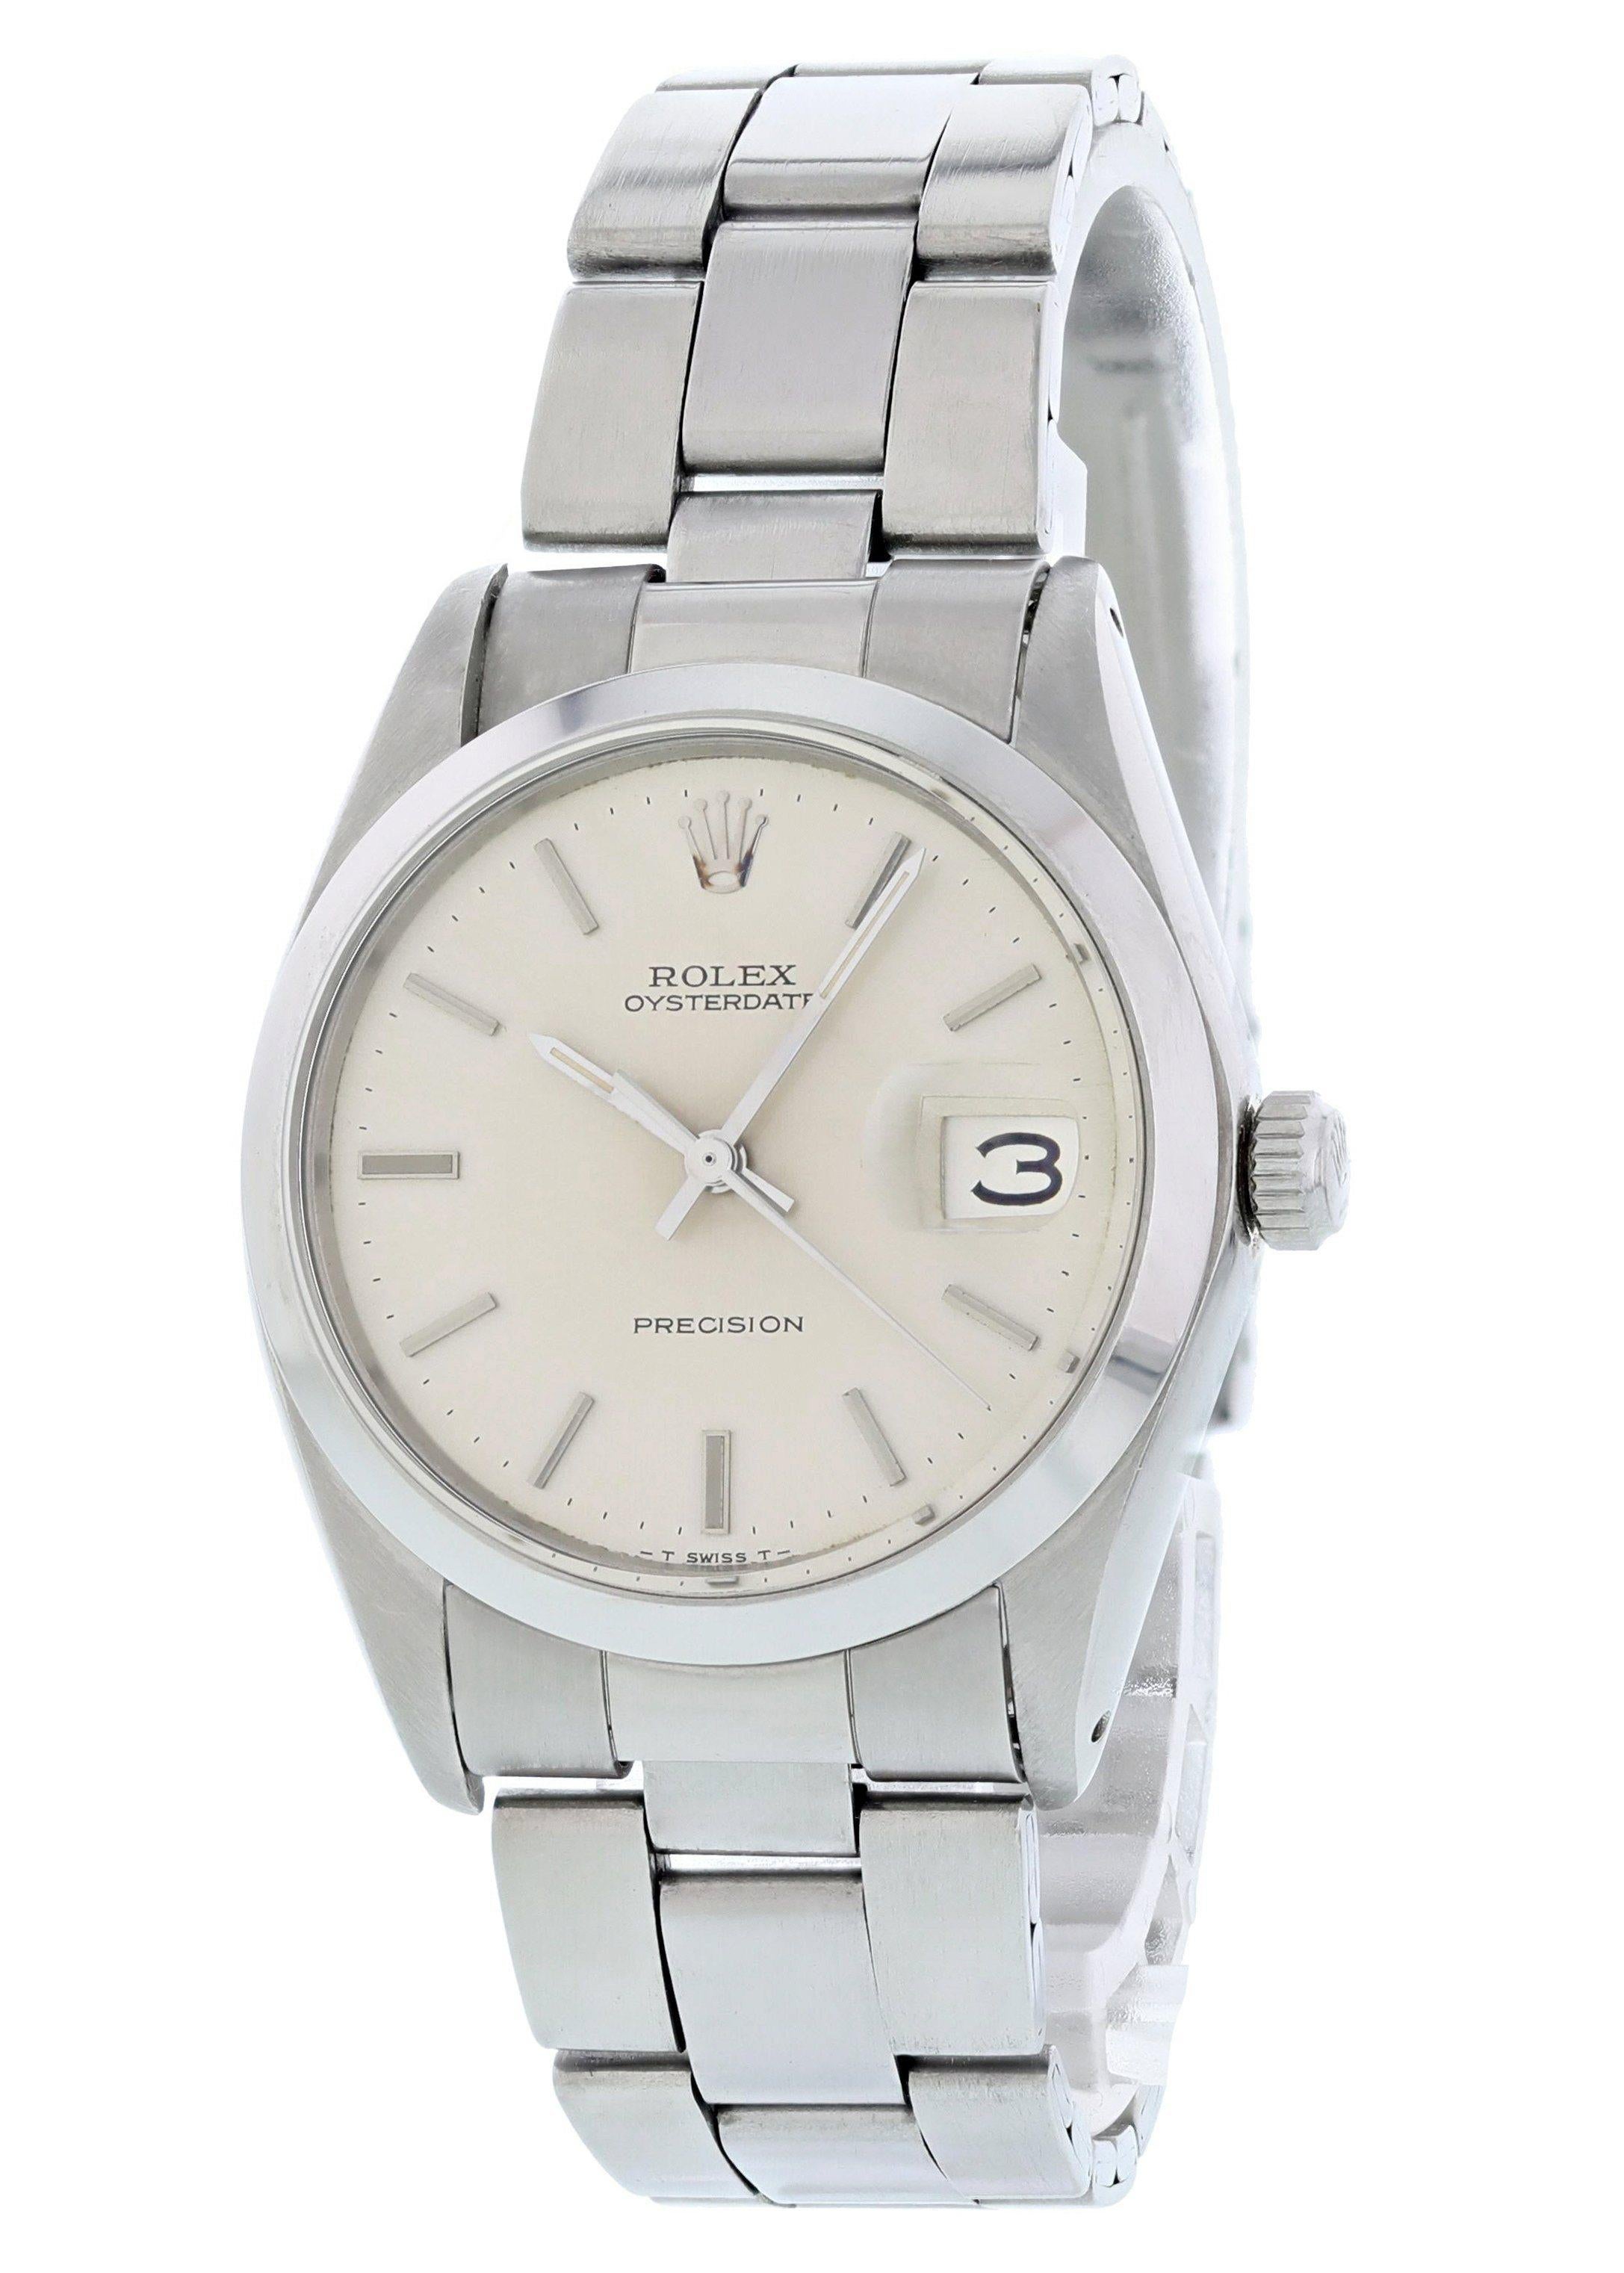 Rolex Oysterdate Precision 6694 Vintage Men's Watch. 34 mm stainless steel case with a smooth bezel. Silver dial with steel hands and indexes. Date aperture at the 3 o'clock Position. Stainless steel bracelet with a fold over clasp. Will fit up to a